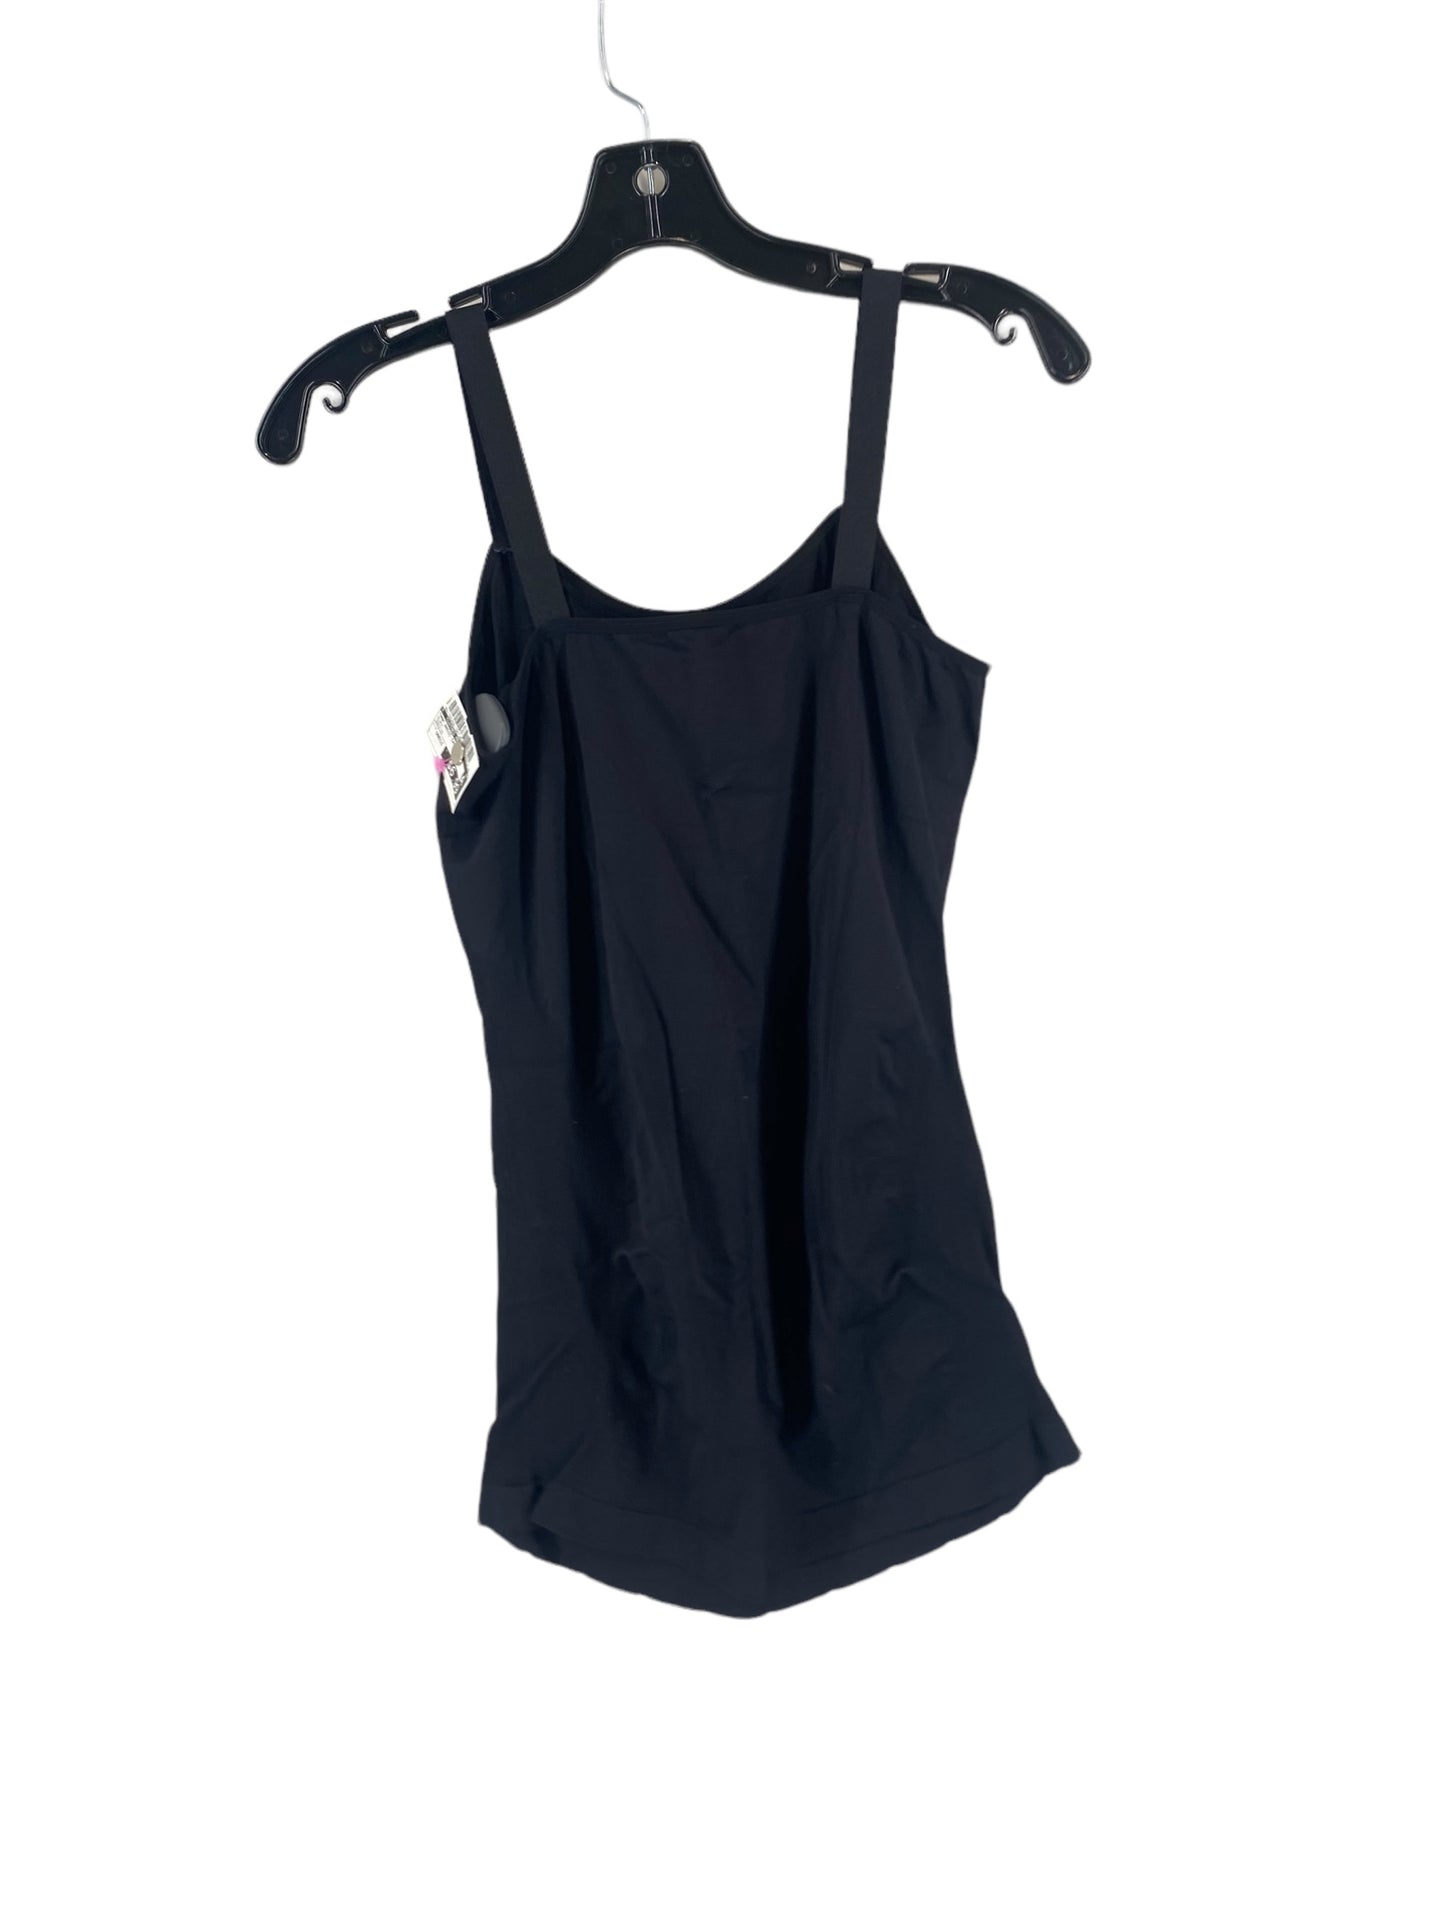 Tank Basic Cami By Clothes Mentor  Size: Onesize